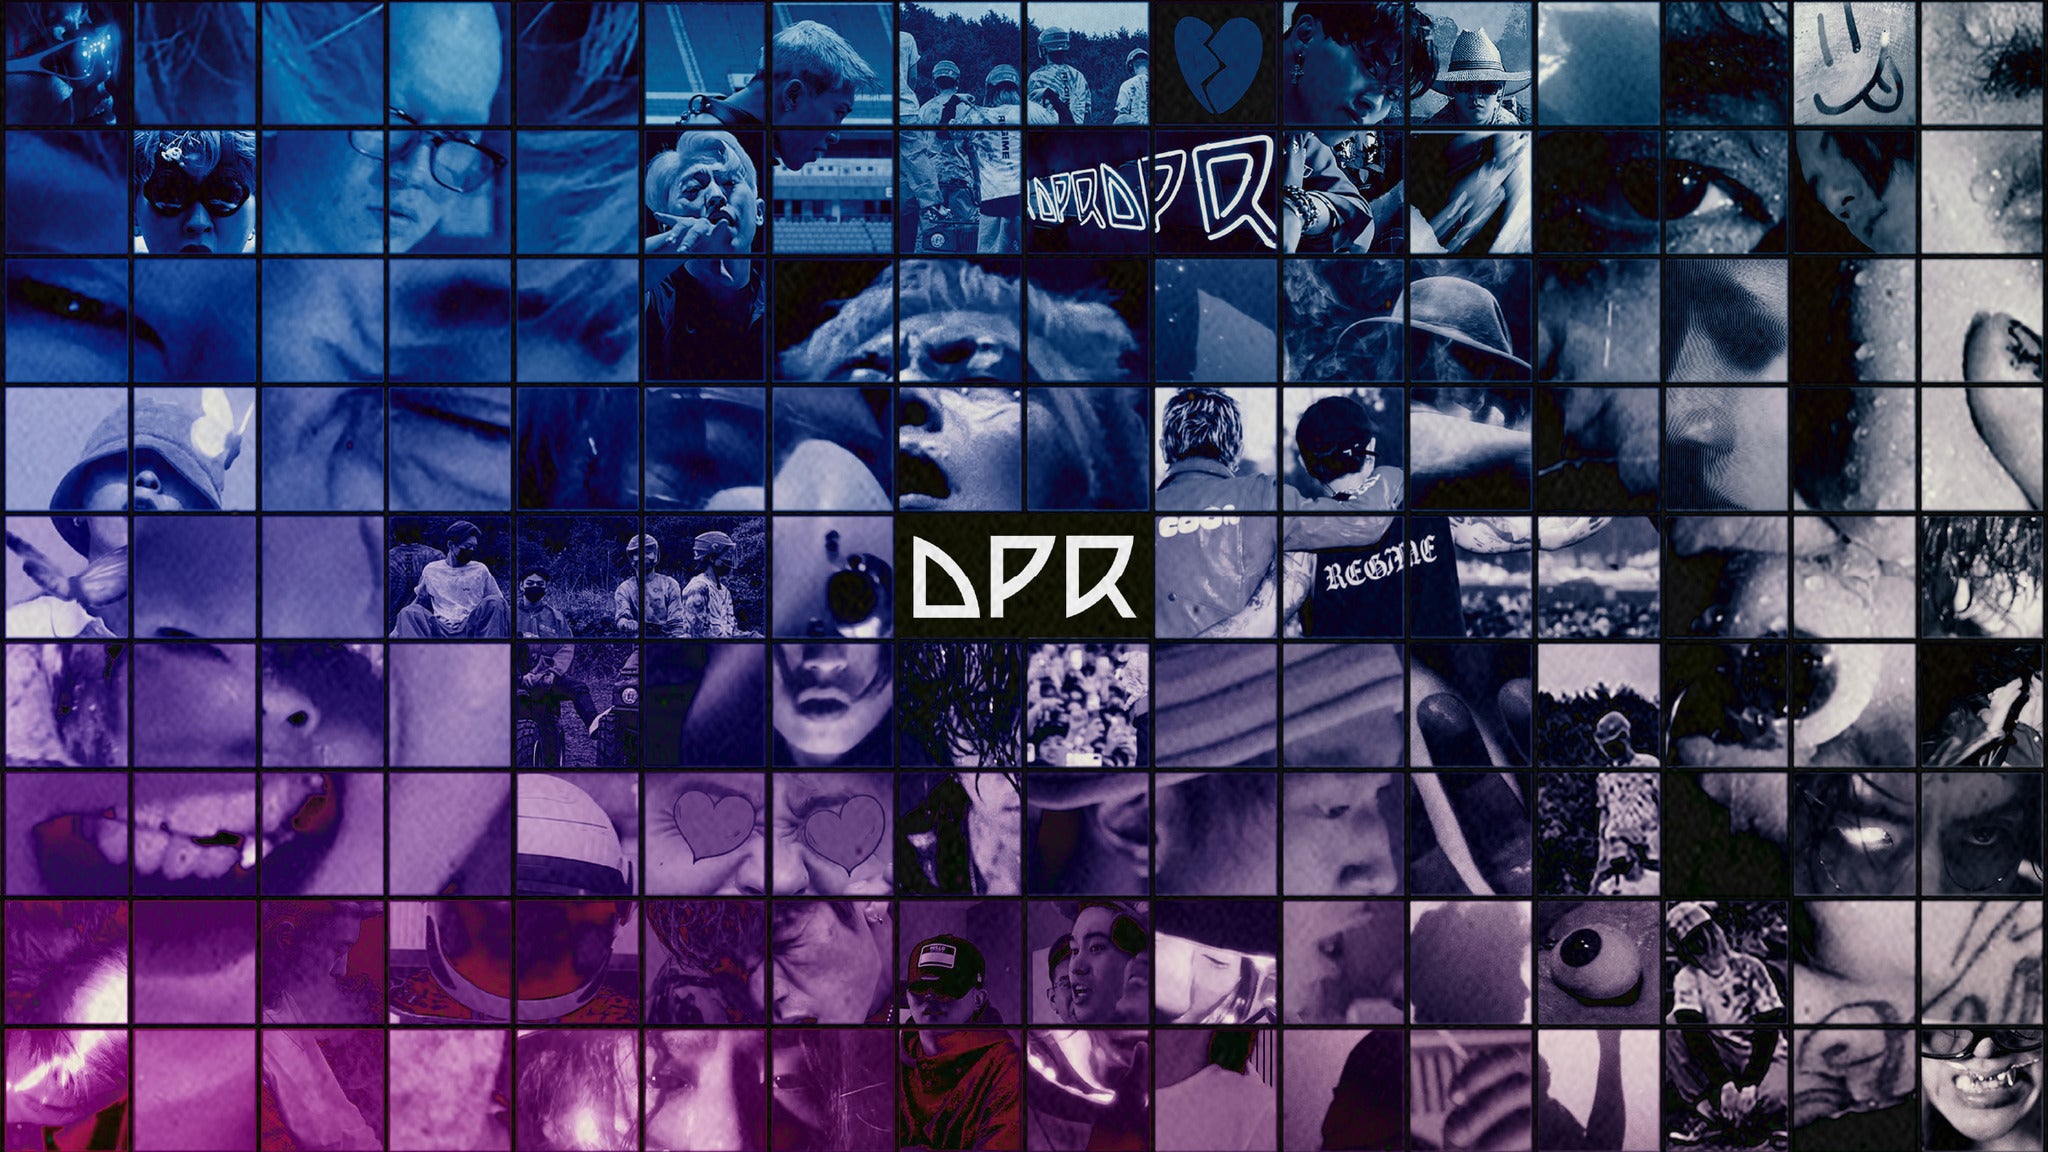 Image used with permission from Ticketmaster | DPR (Dream Perfect Regime) tickets